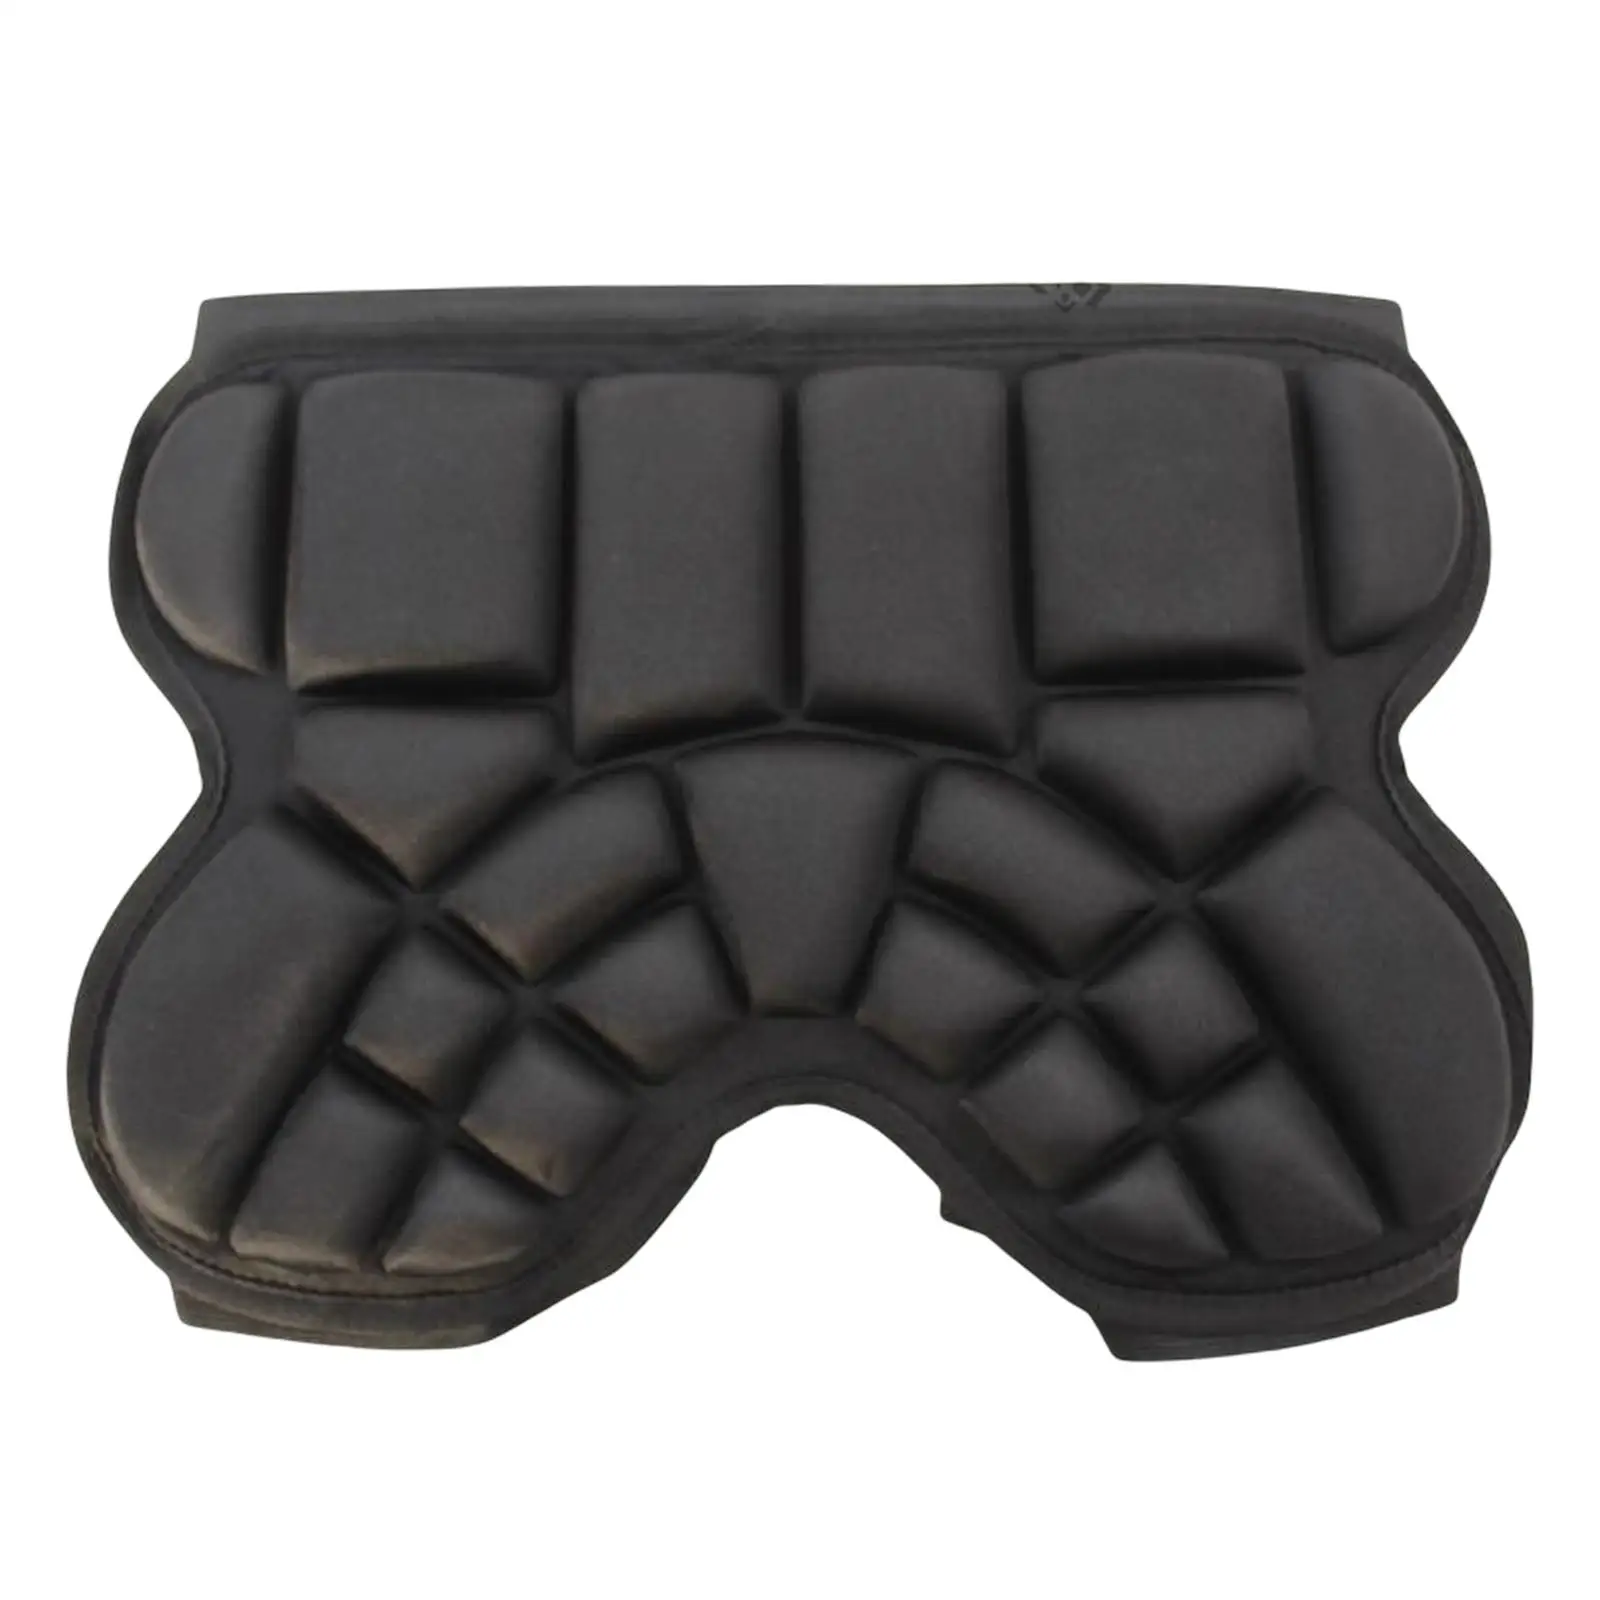 Hip Guard Pad Pad Support Gear Supporter Padded Hip Protection for Skiing Snowboarding Winter Sports Climbing Scooter